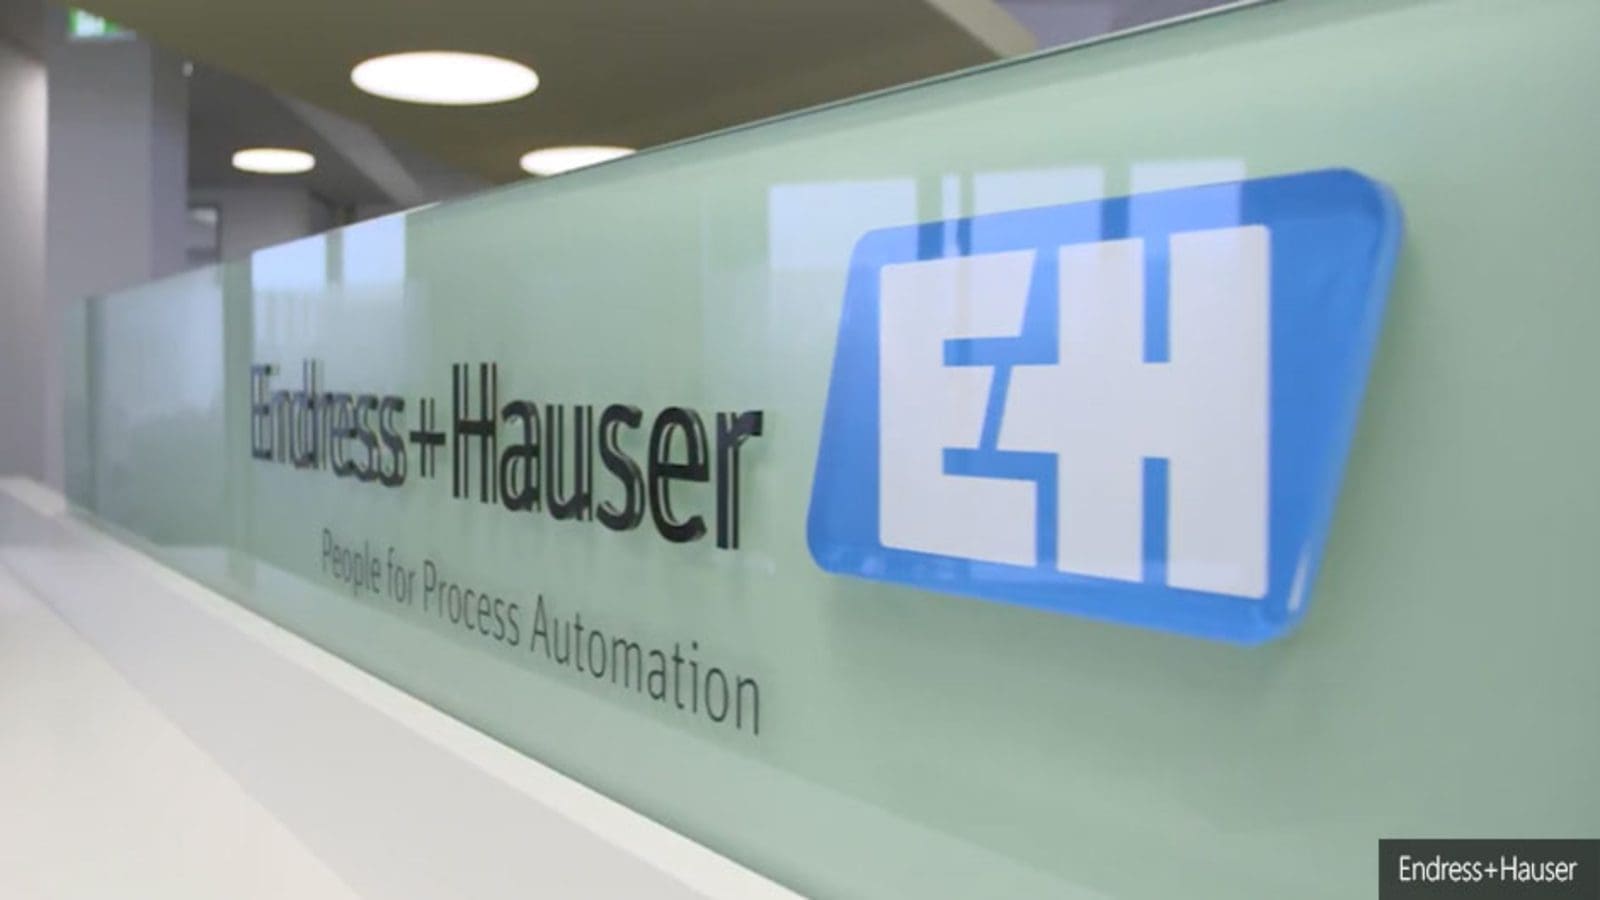 Endress+Hauser Group sells 2.6 million instruments in 2021 